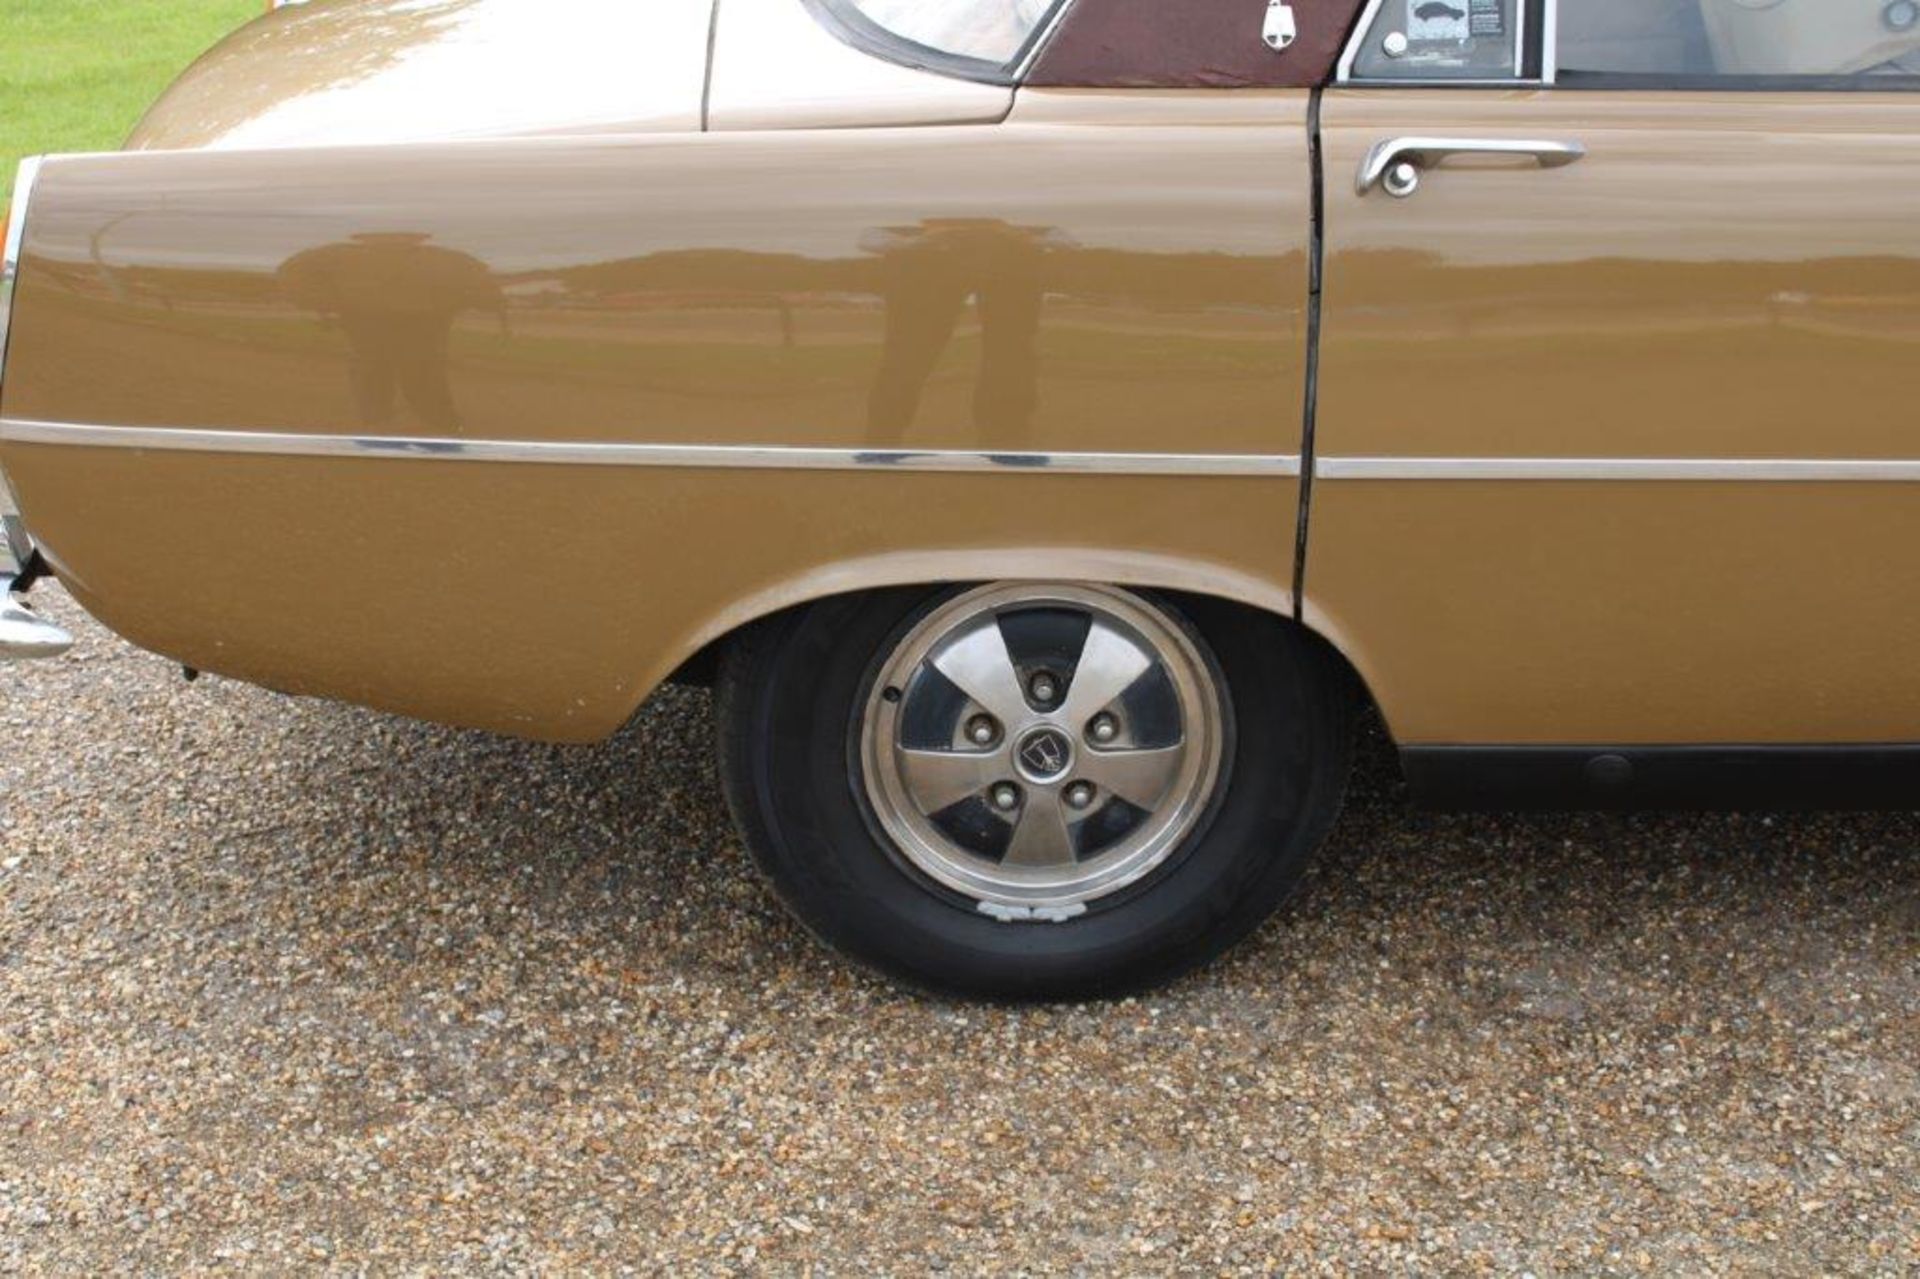 1970 Rover P6 3500 S 1 of 6 development cars - Image 10 of 21